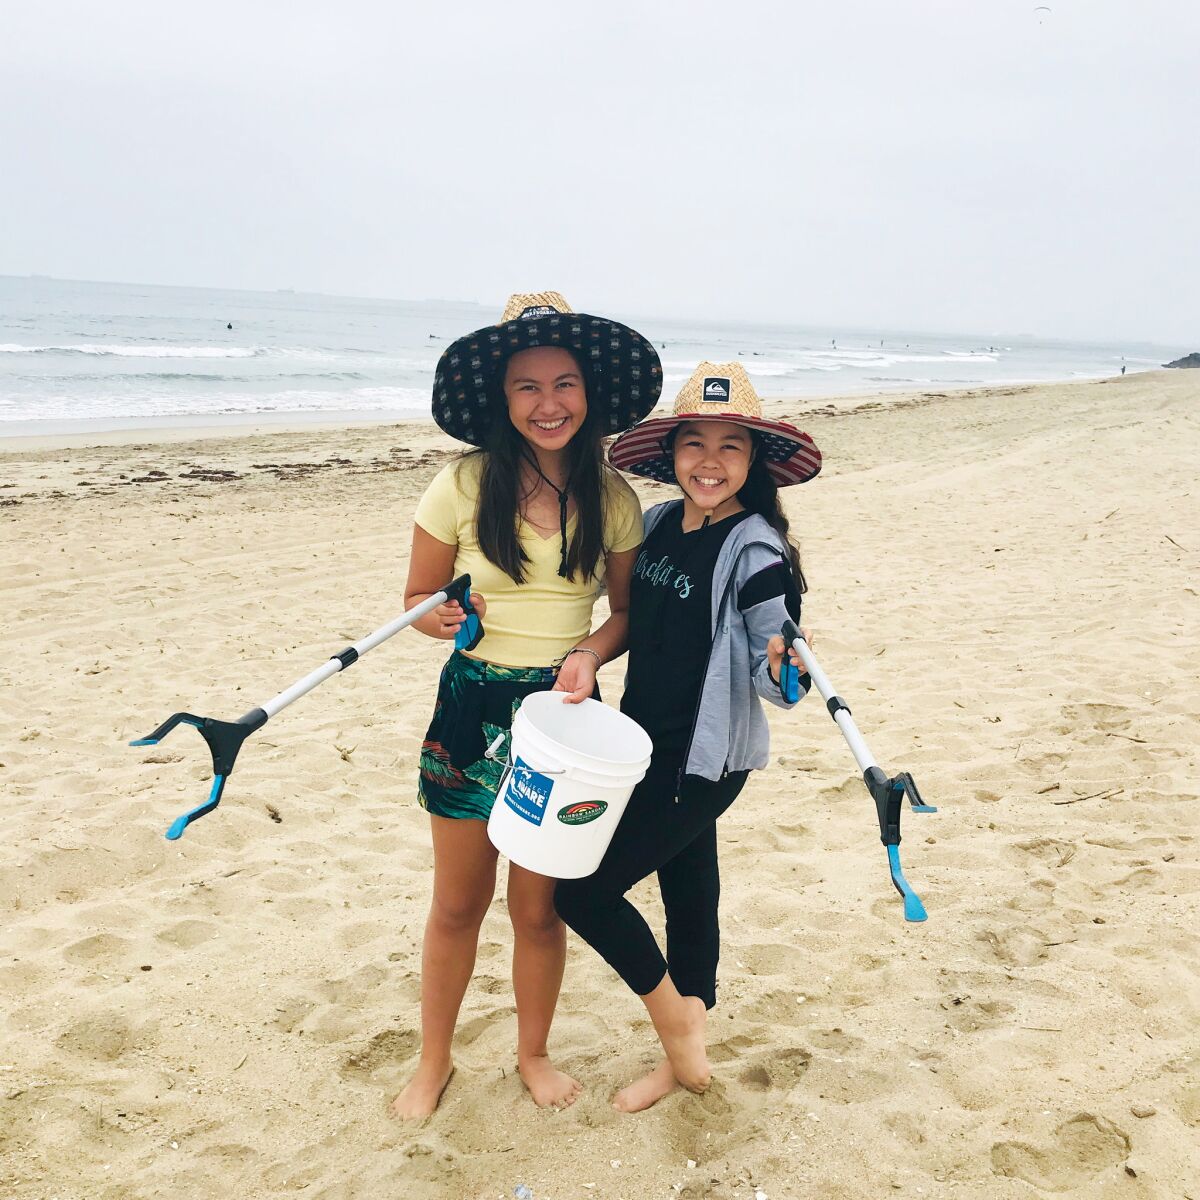 Chloe Mei Espinosa, left, runs a YouTube channel with her younger sister, Ella Lin, right, called "Sustainable Sisters."